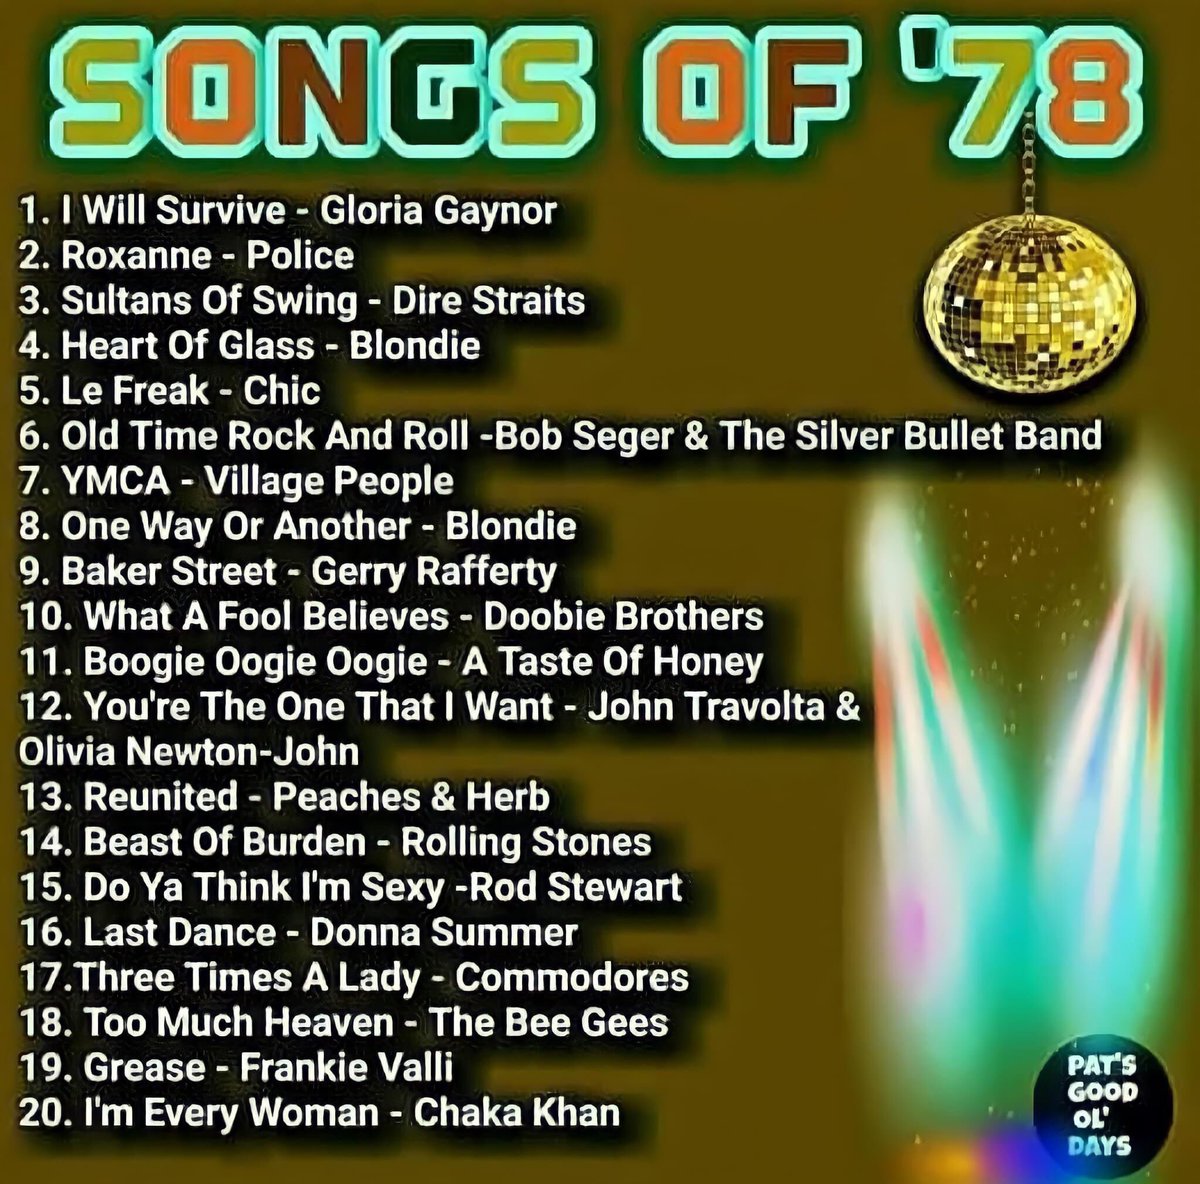 What’s your favourite song from 1978? It doesn’t have to be from this list.